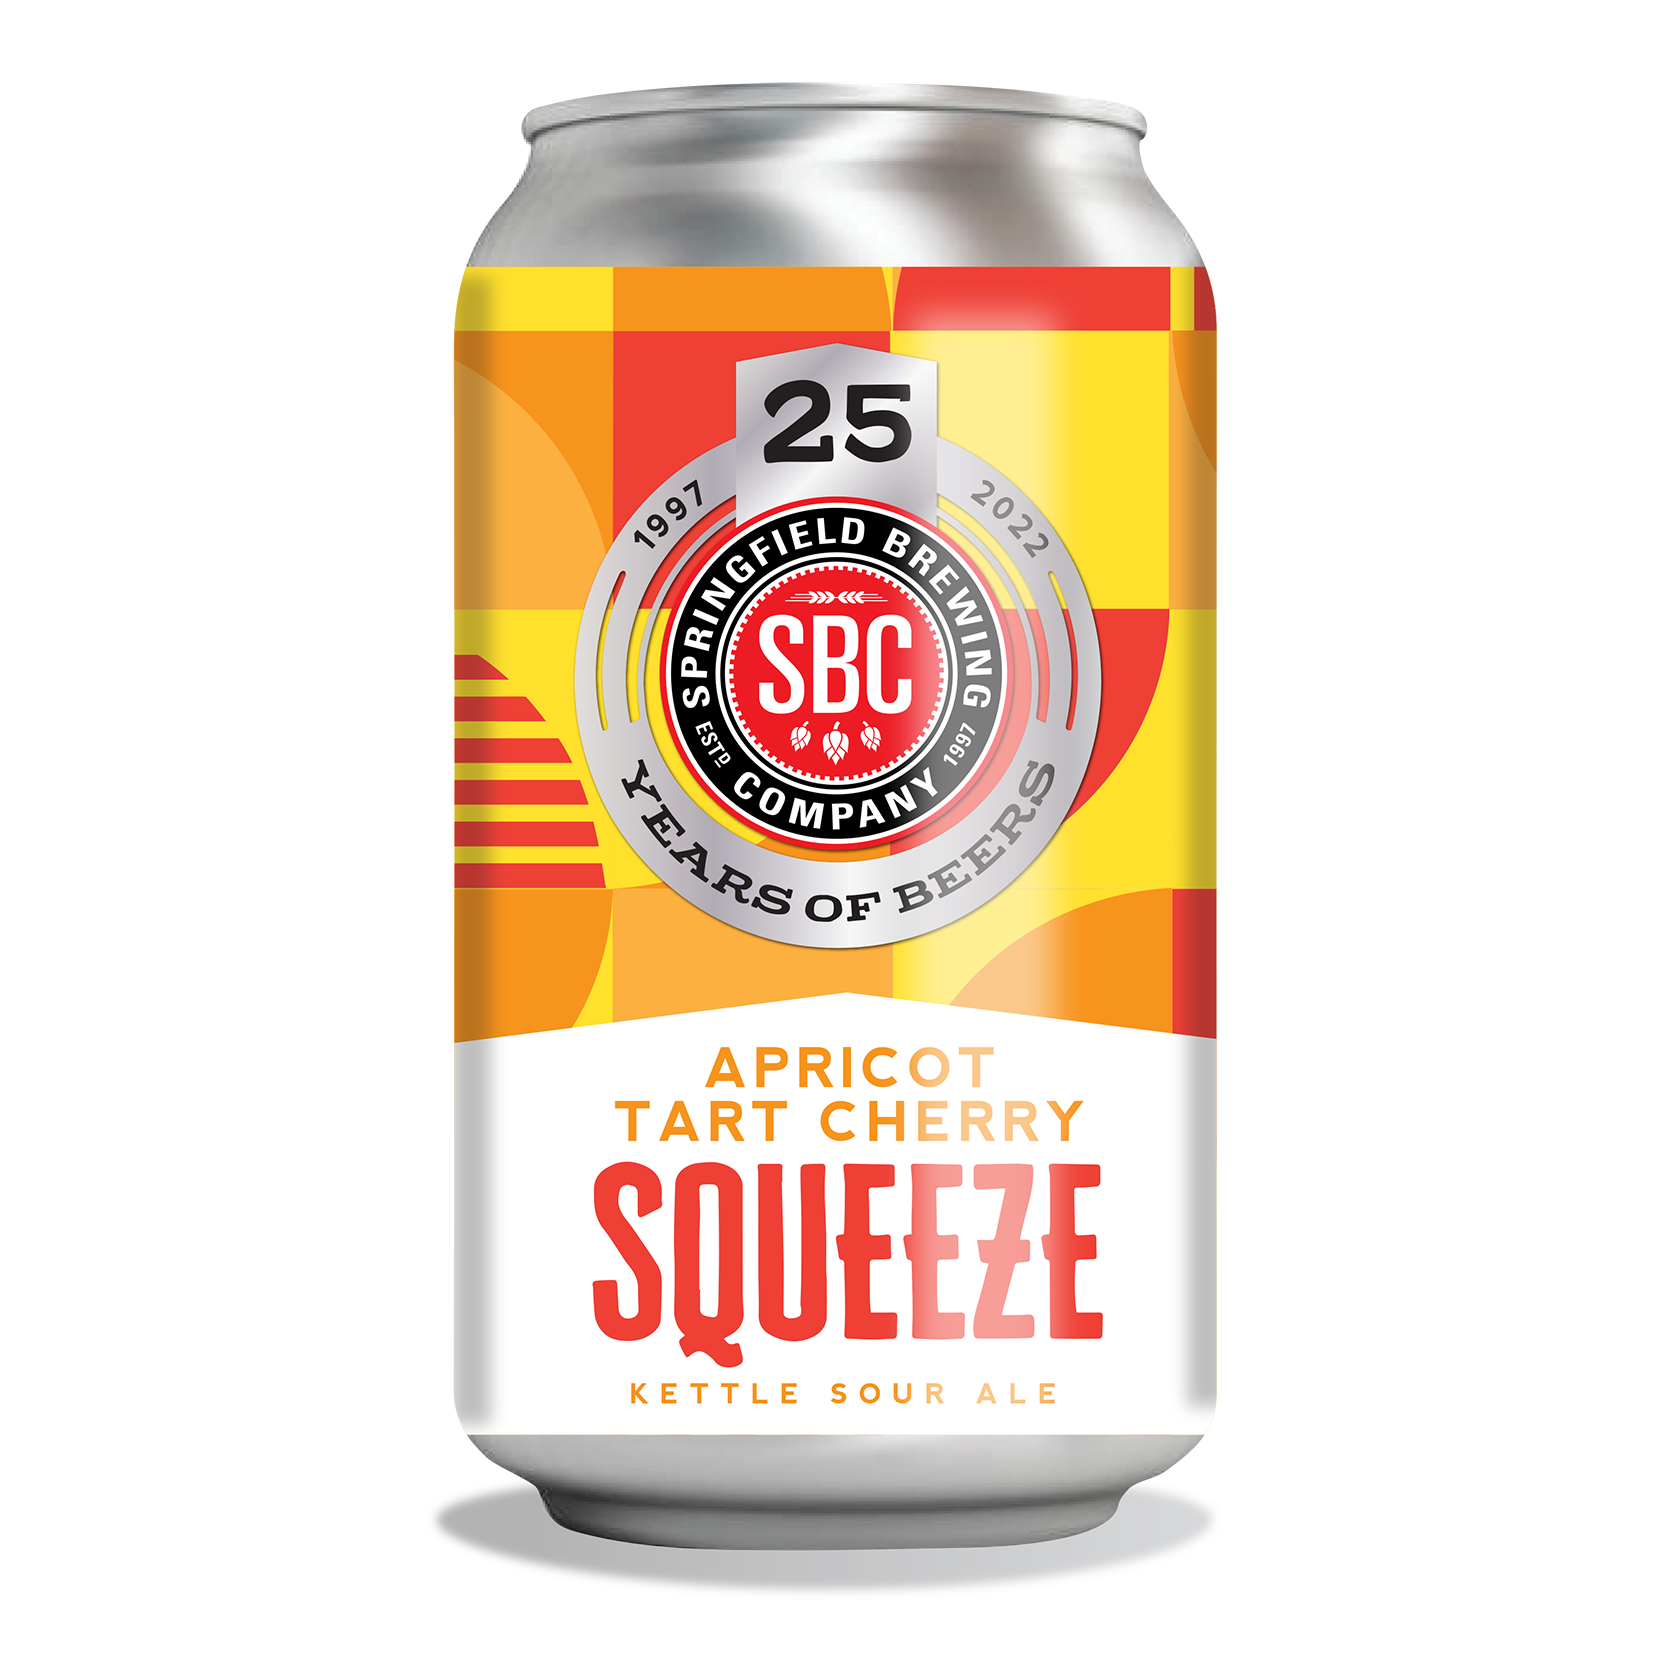 https://brewery.springfieldbrewingco.com/wp-content/uploads/2022/03/25thApricotSqueezeUpdate_CanWebsite.png